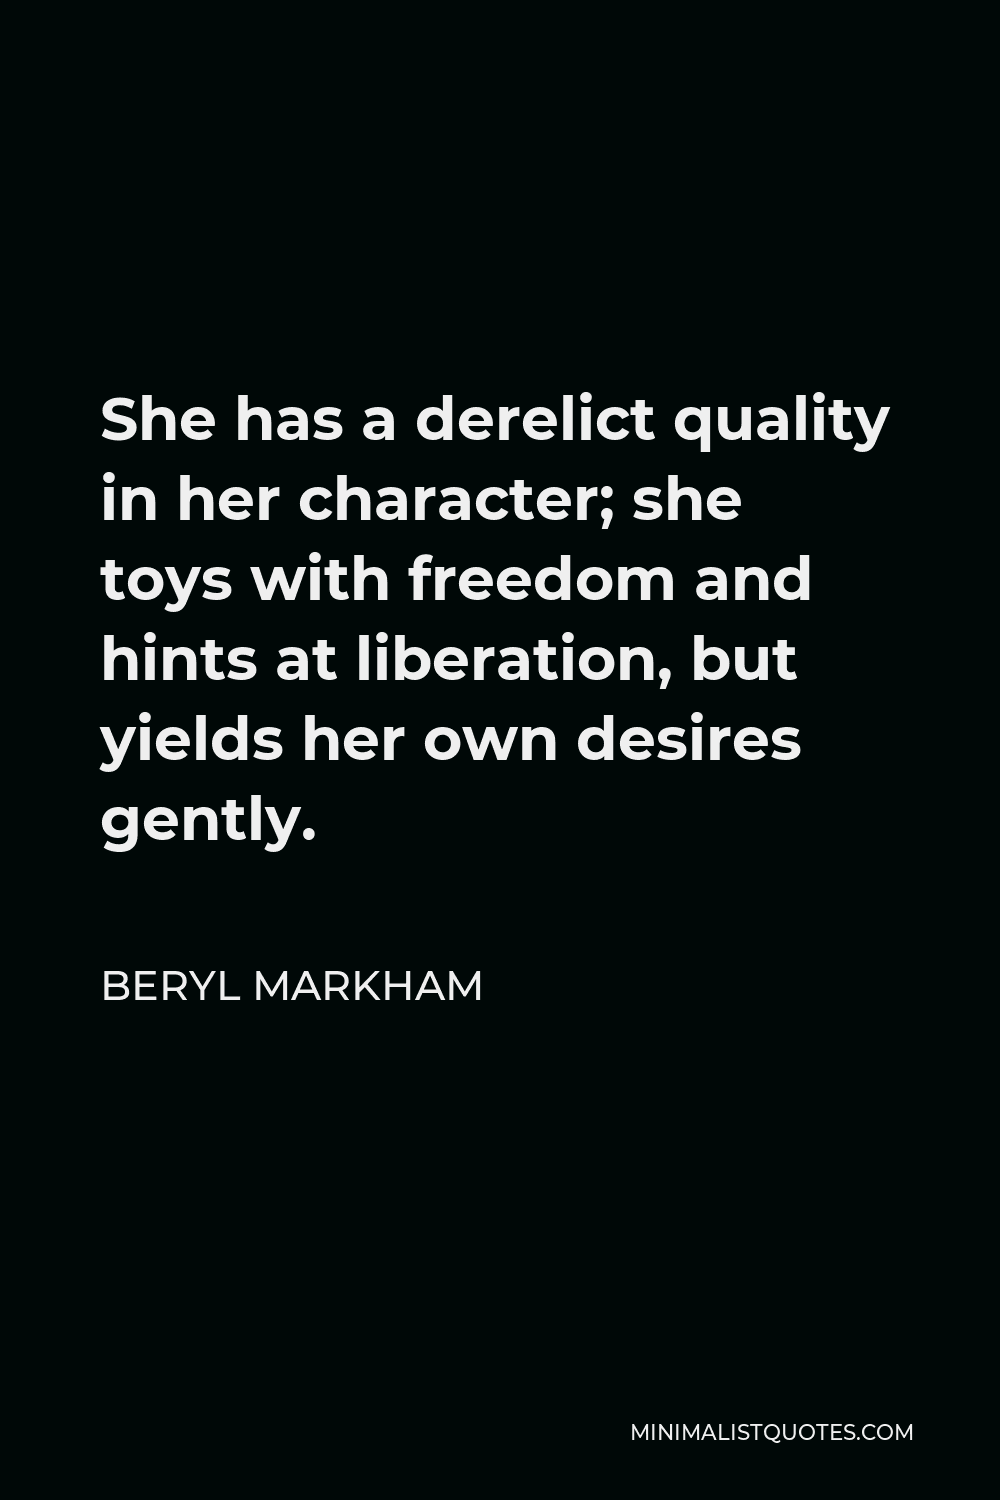 Beryl Markham Quote - She has a derelict quality in her character; she toys with freedom and hints at liberation, but yields her own desires gently.